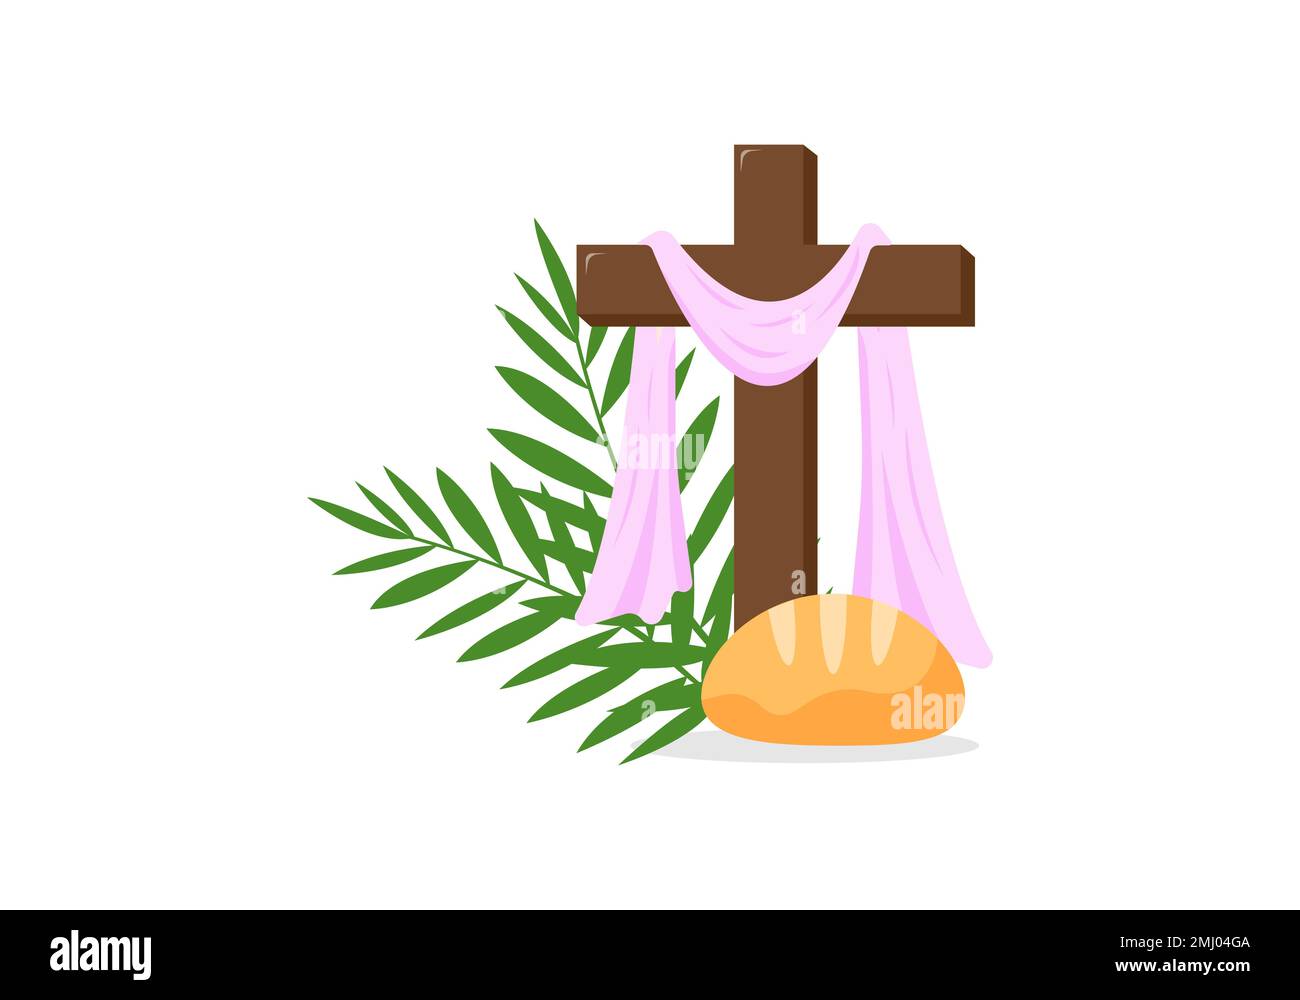 Christian greeting card or banner of the Holy Week before Easter. Maundy Thursday, Good Friday, Holy Saturday. Bread, cross of Jesus Christ, palm branches. Vector illustration Stock Vector